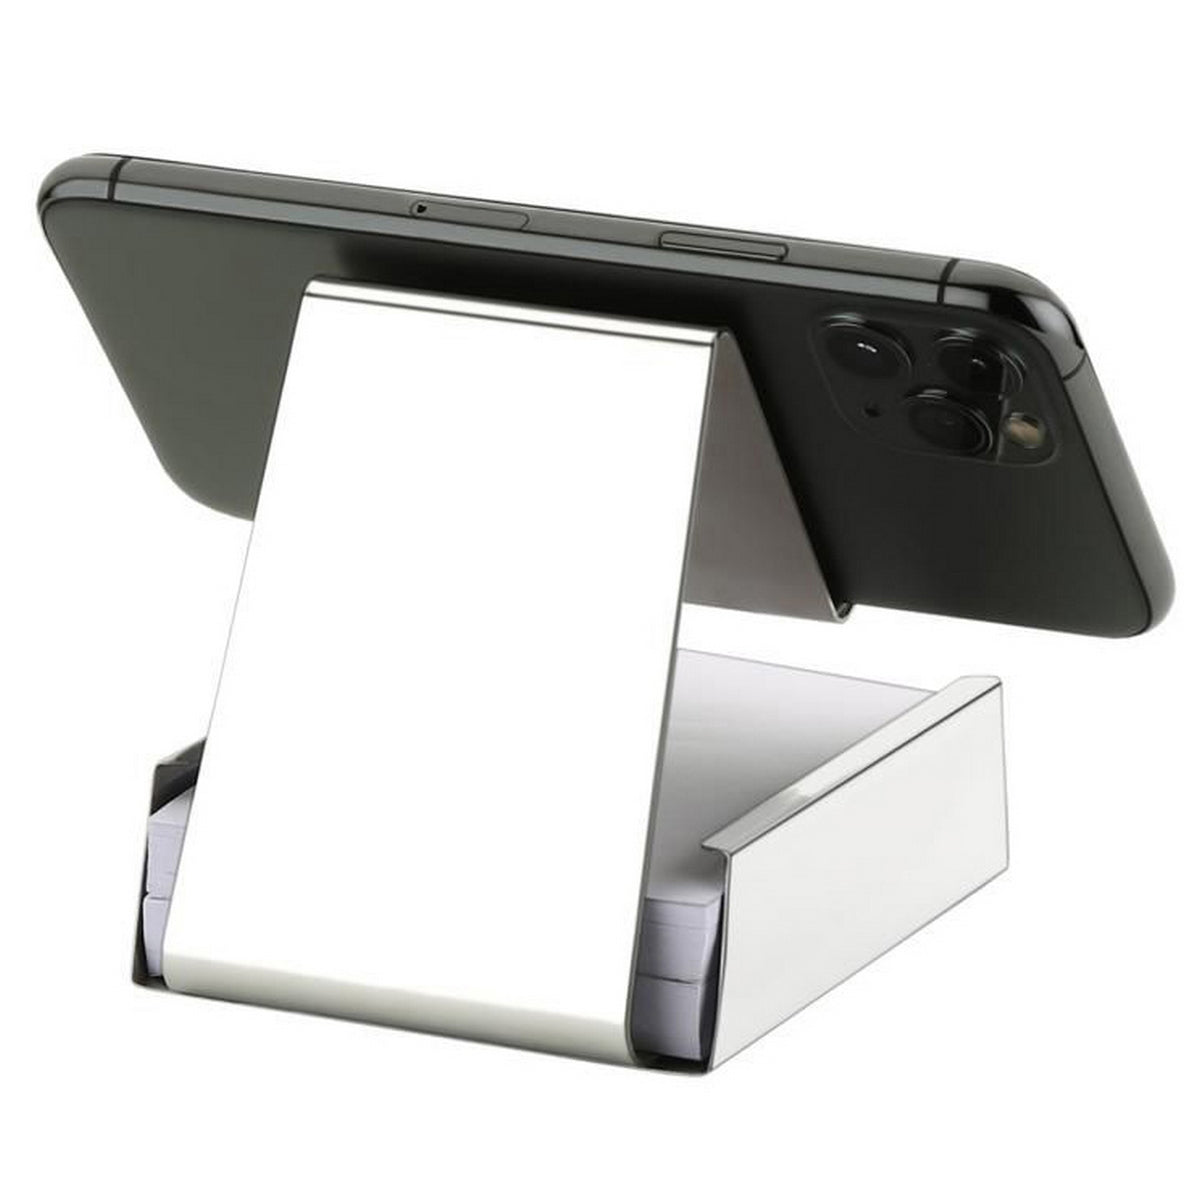 jags-mumbai Office Desk Stationery Mobile Stand With Writing Pad